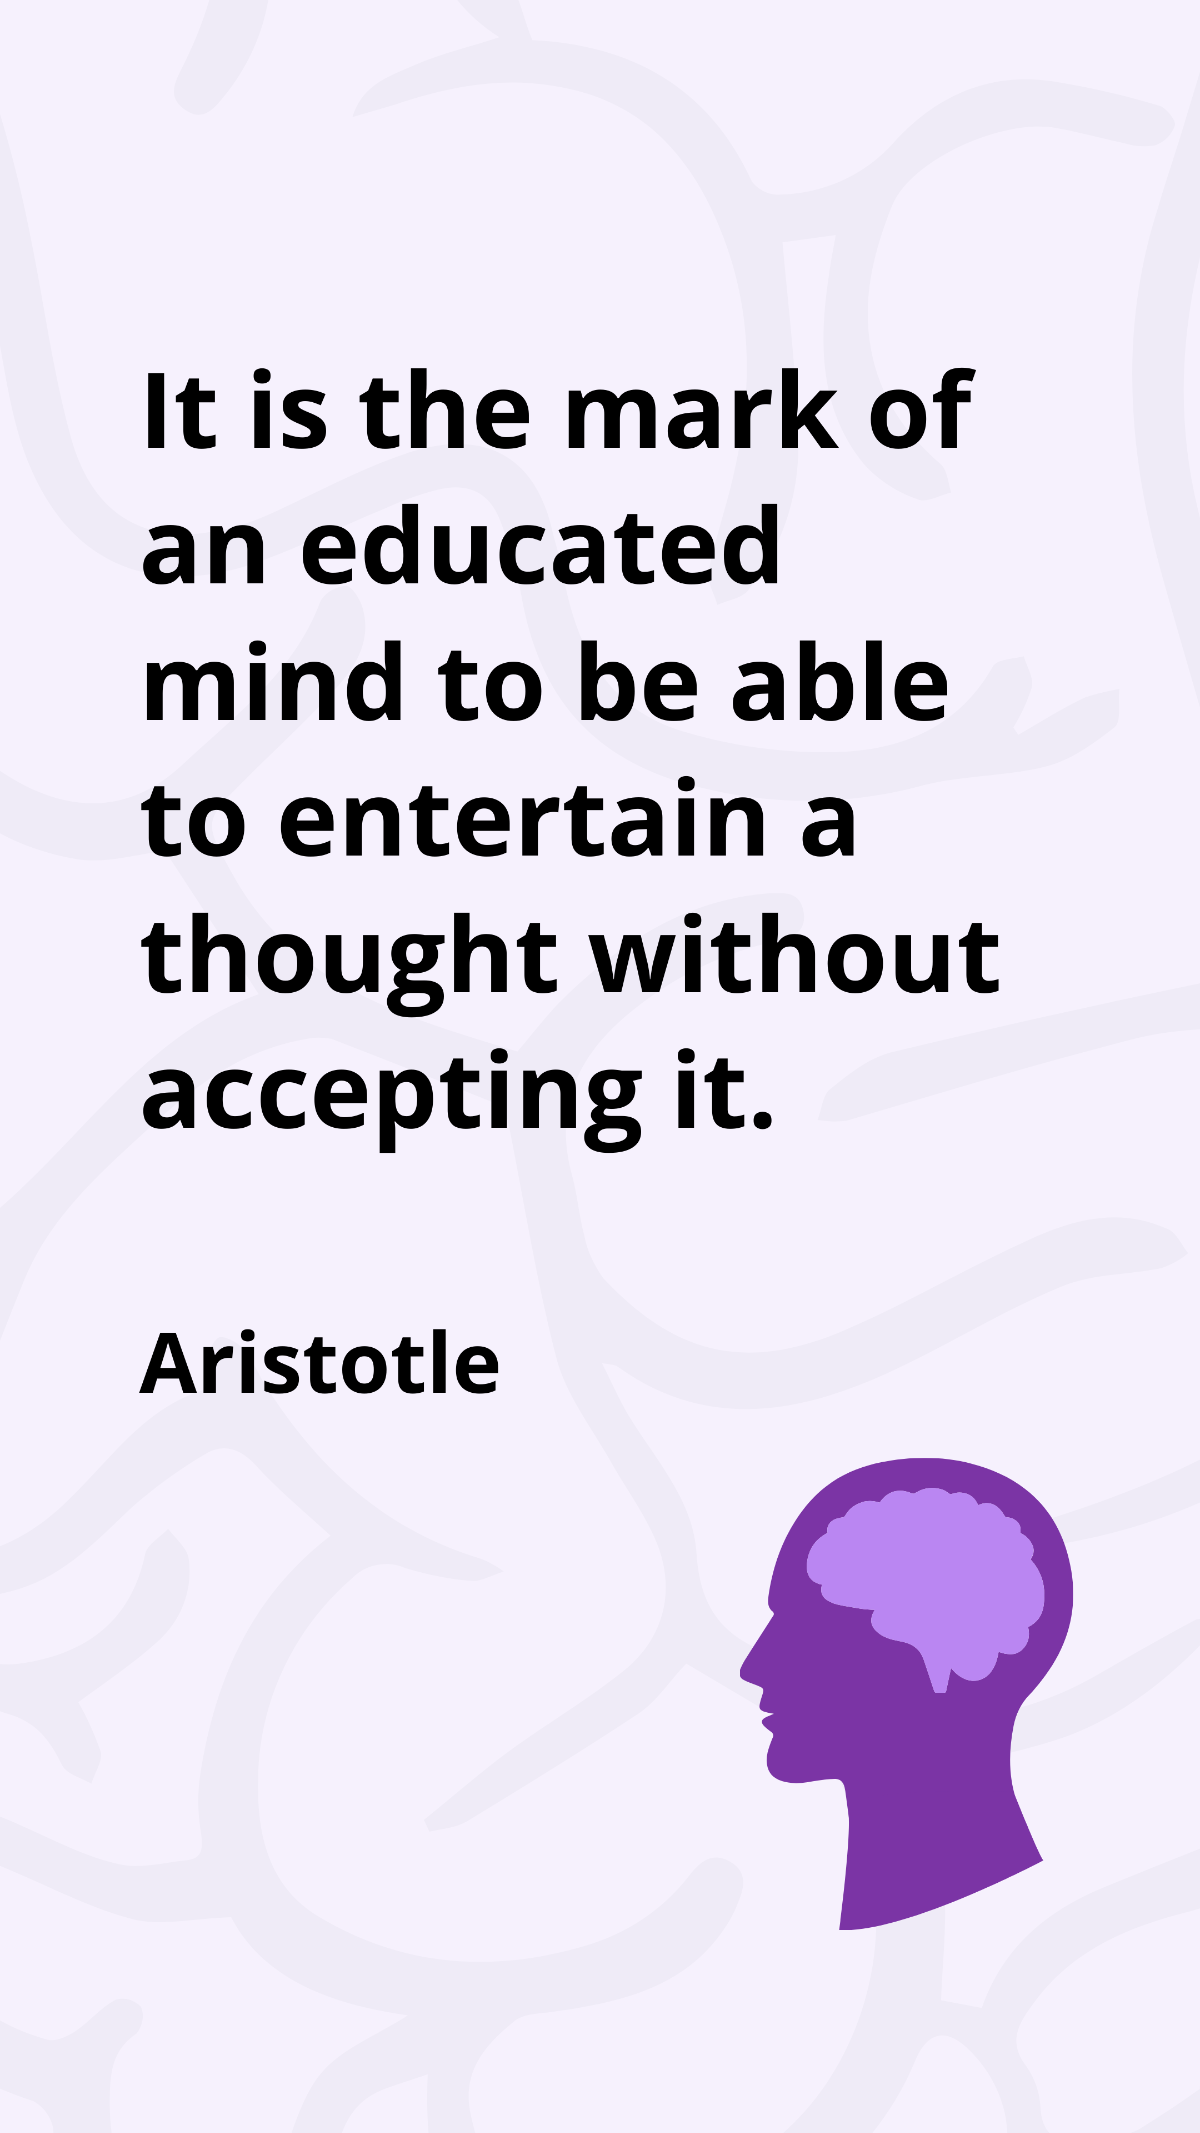 Aristotle -It is the mark of an educated mind to be able to entertain a thought without accepting it. Template